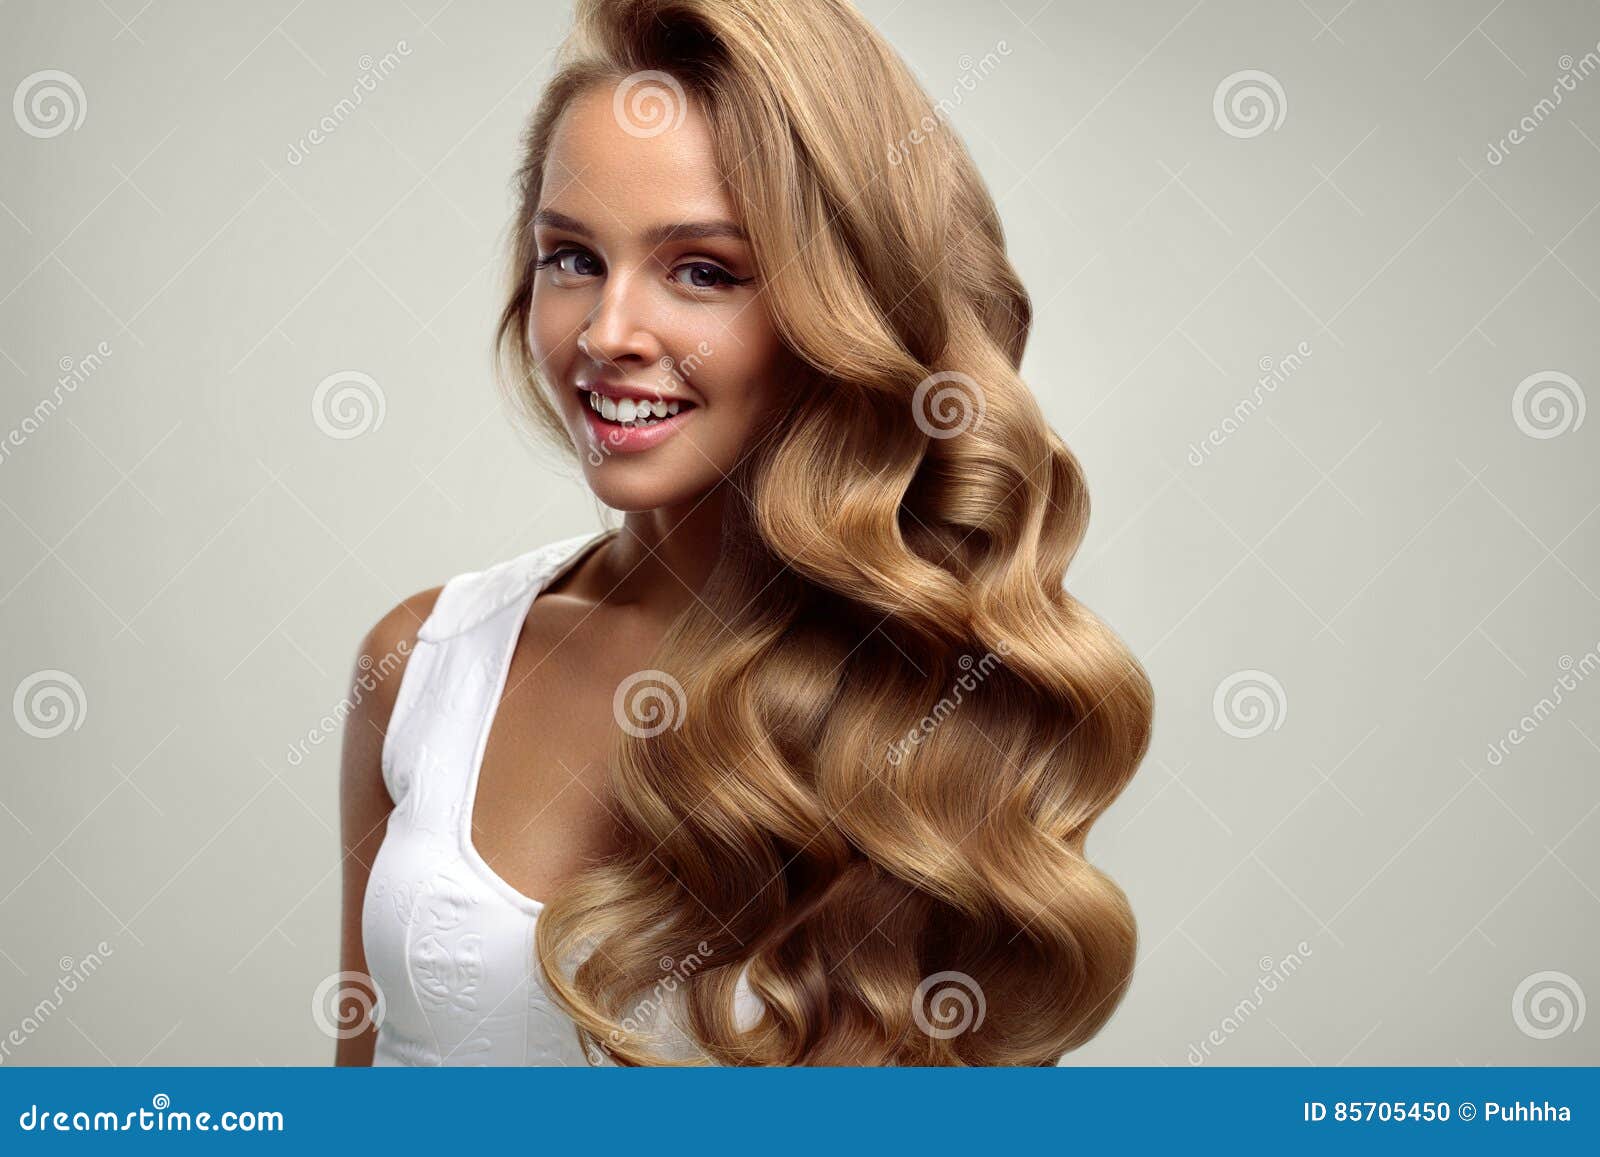 Long blonde hair girl with curls - wide 7